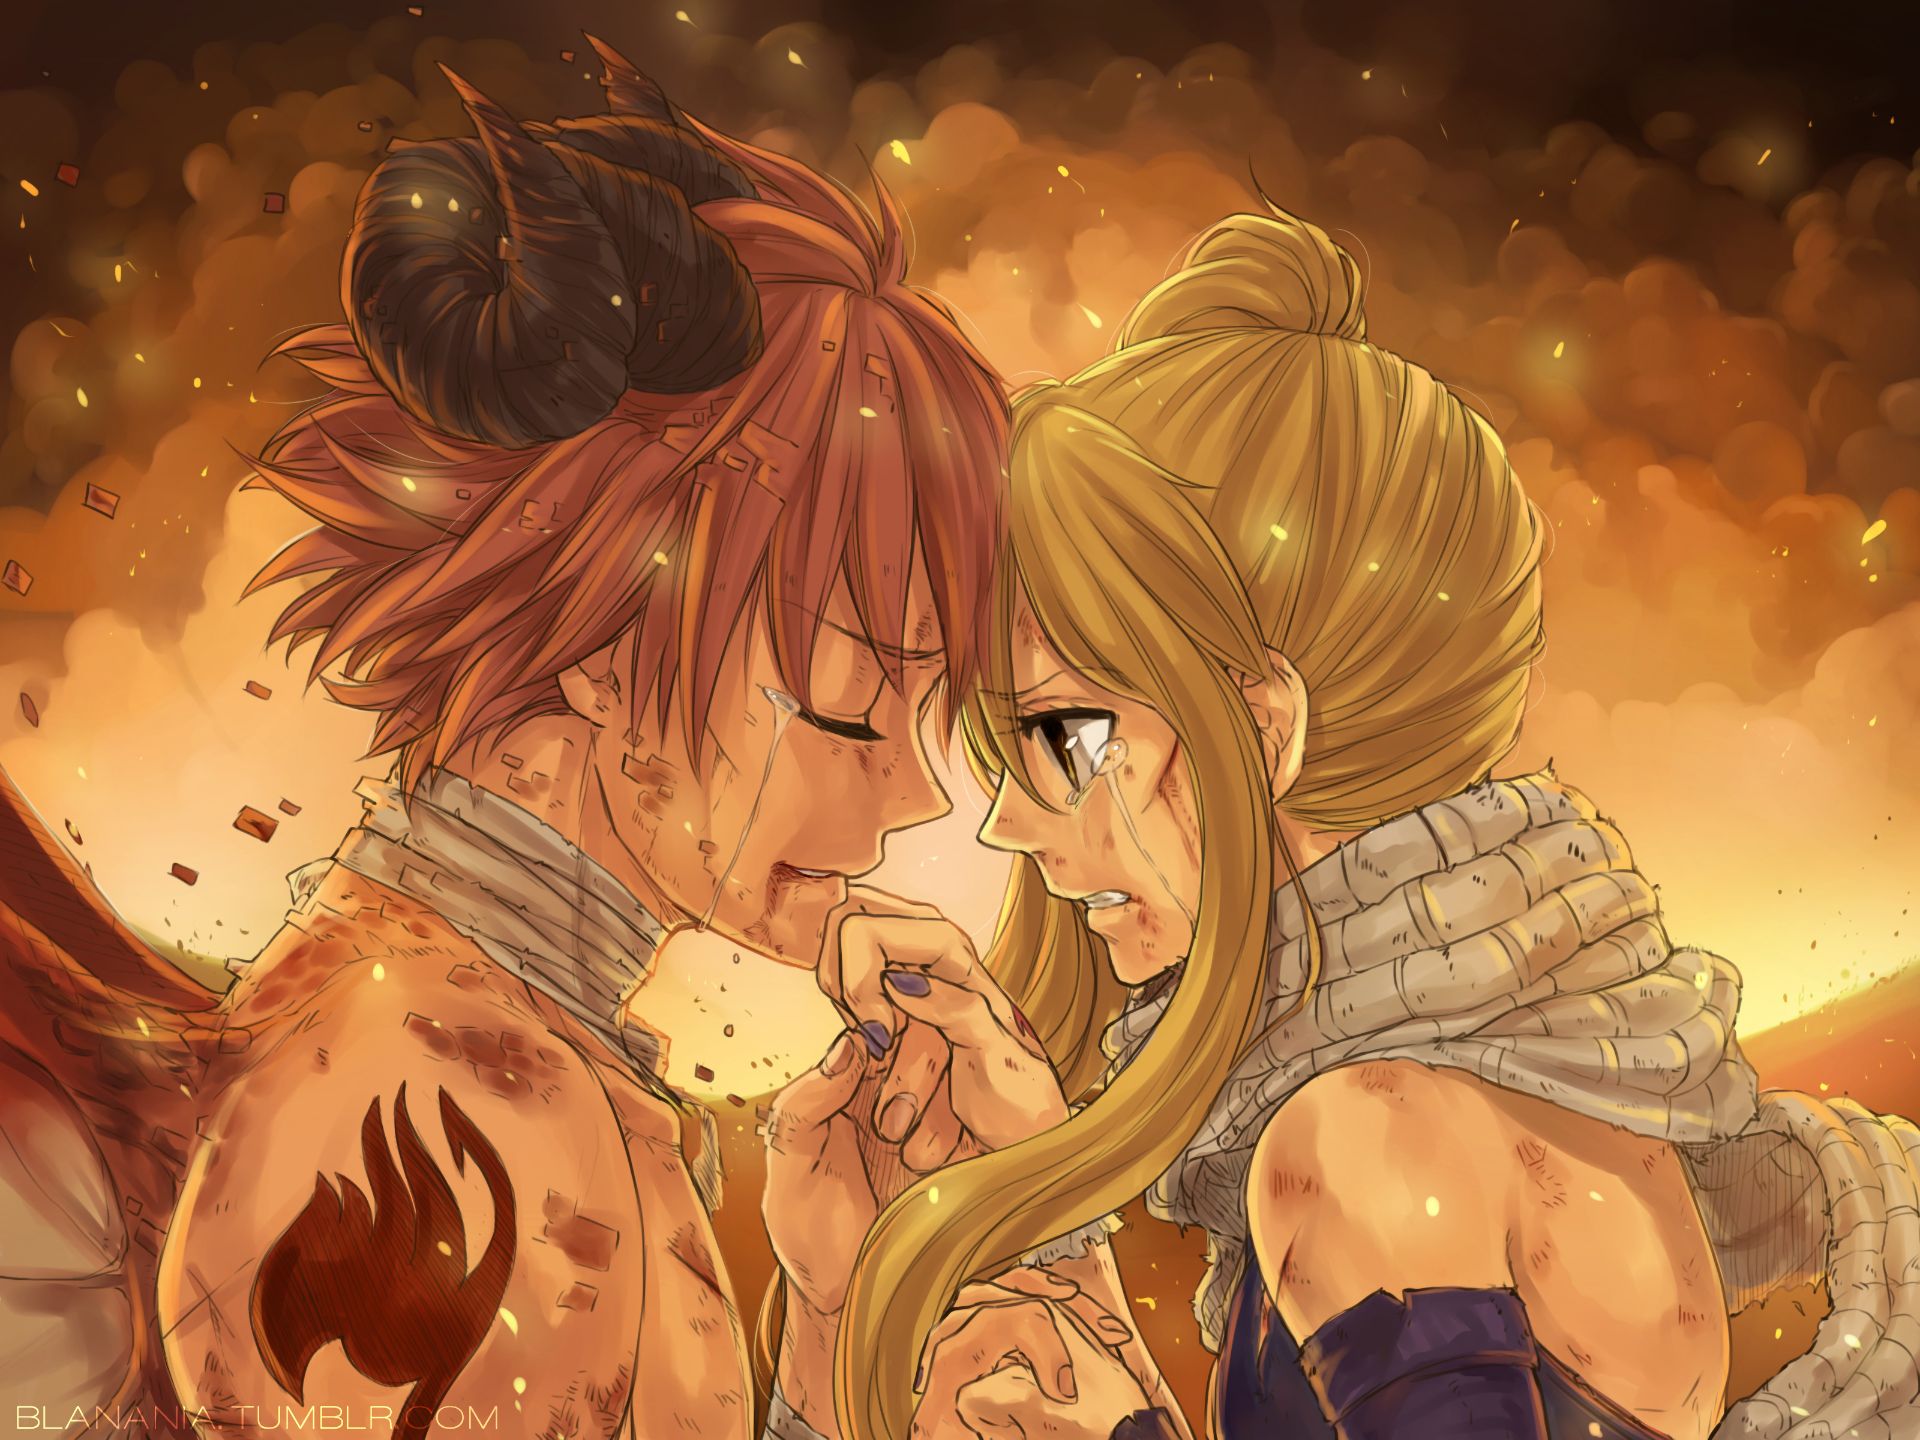 Monkey D. Luffy X Nami - Luffy and Nami 🔥🔥 Natsu and Lucy. https